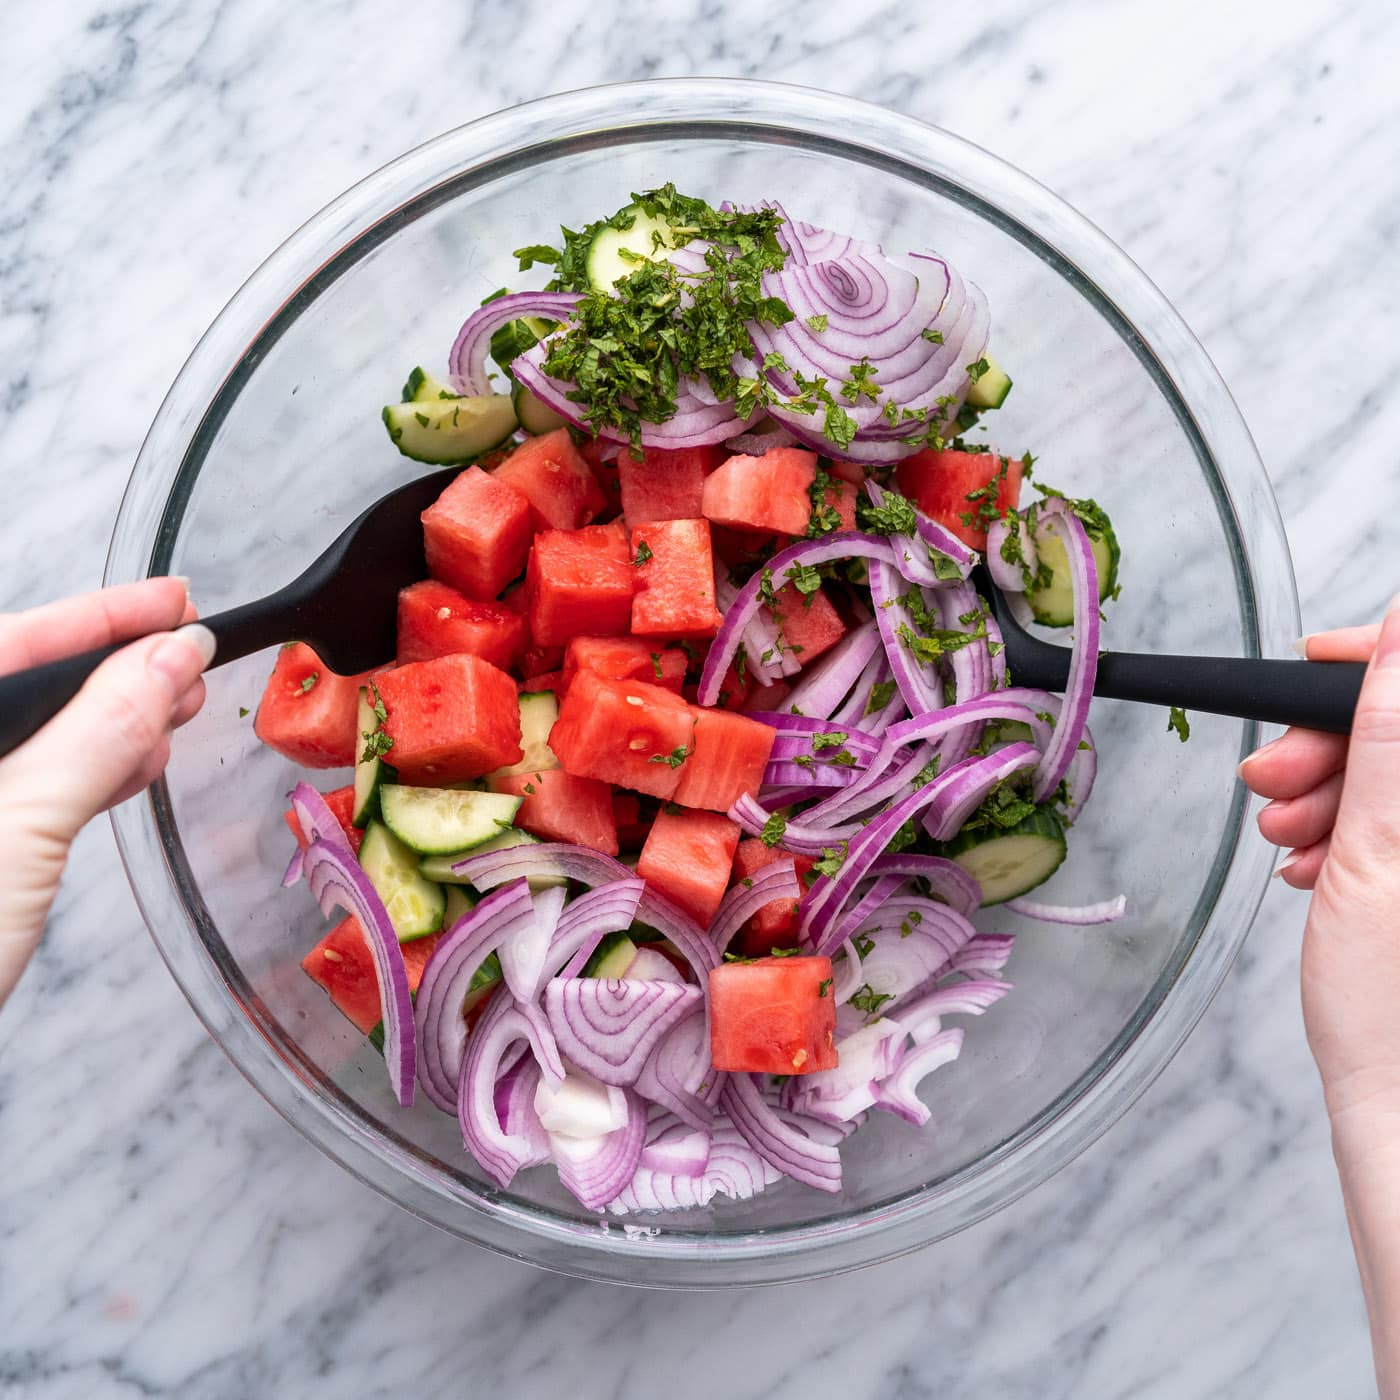 tossing watermelon salad ingredients together in a bowl